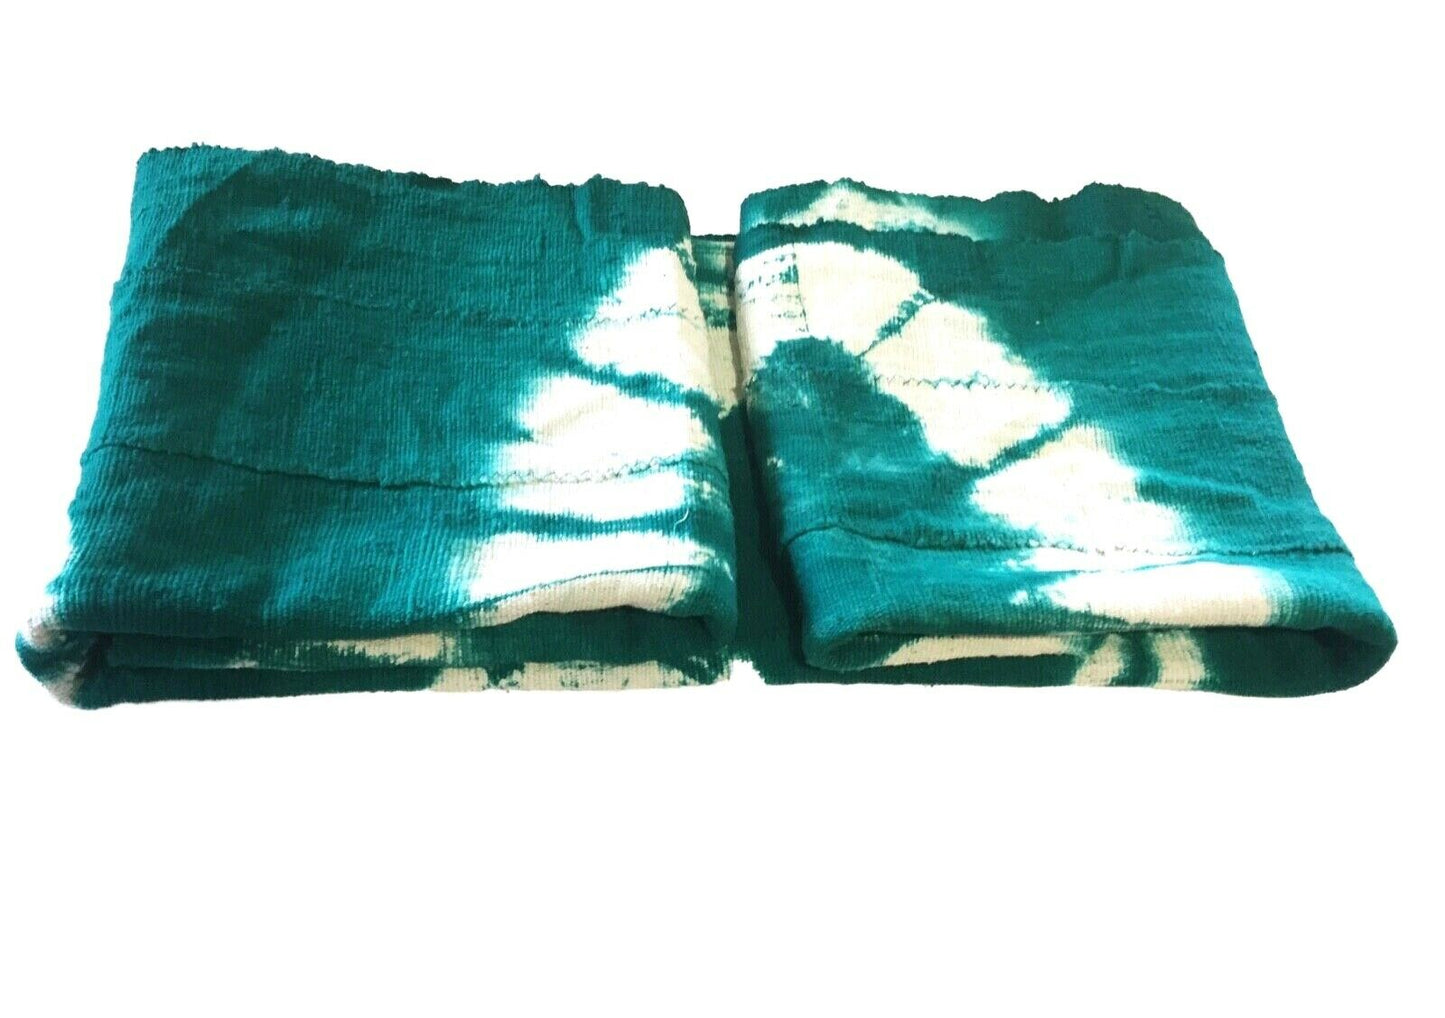 African Emerald Green & White Mud Cloth Textile Mali 45" by 63" # 575